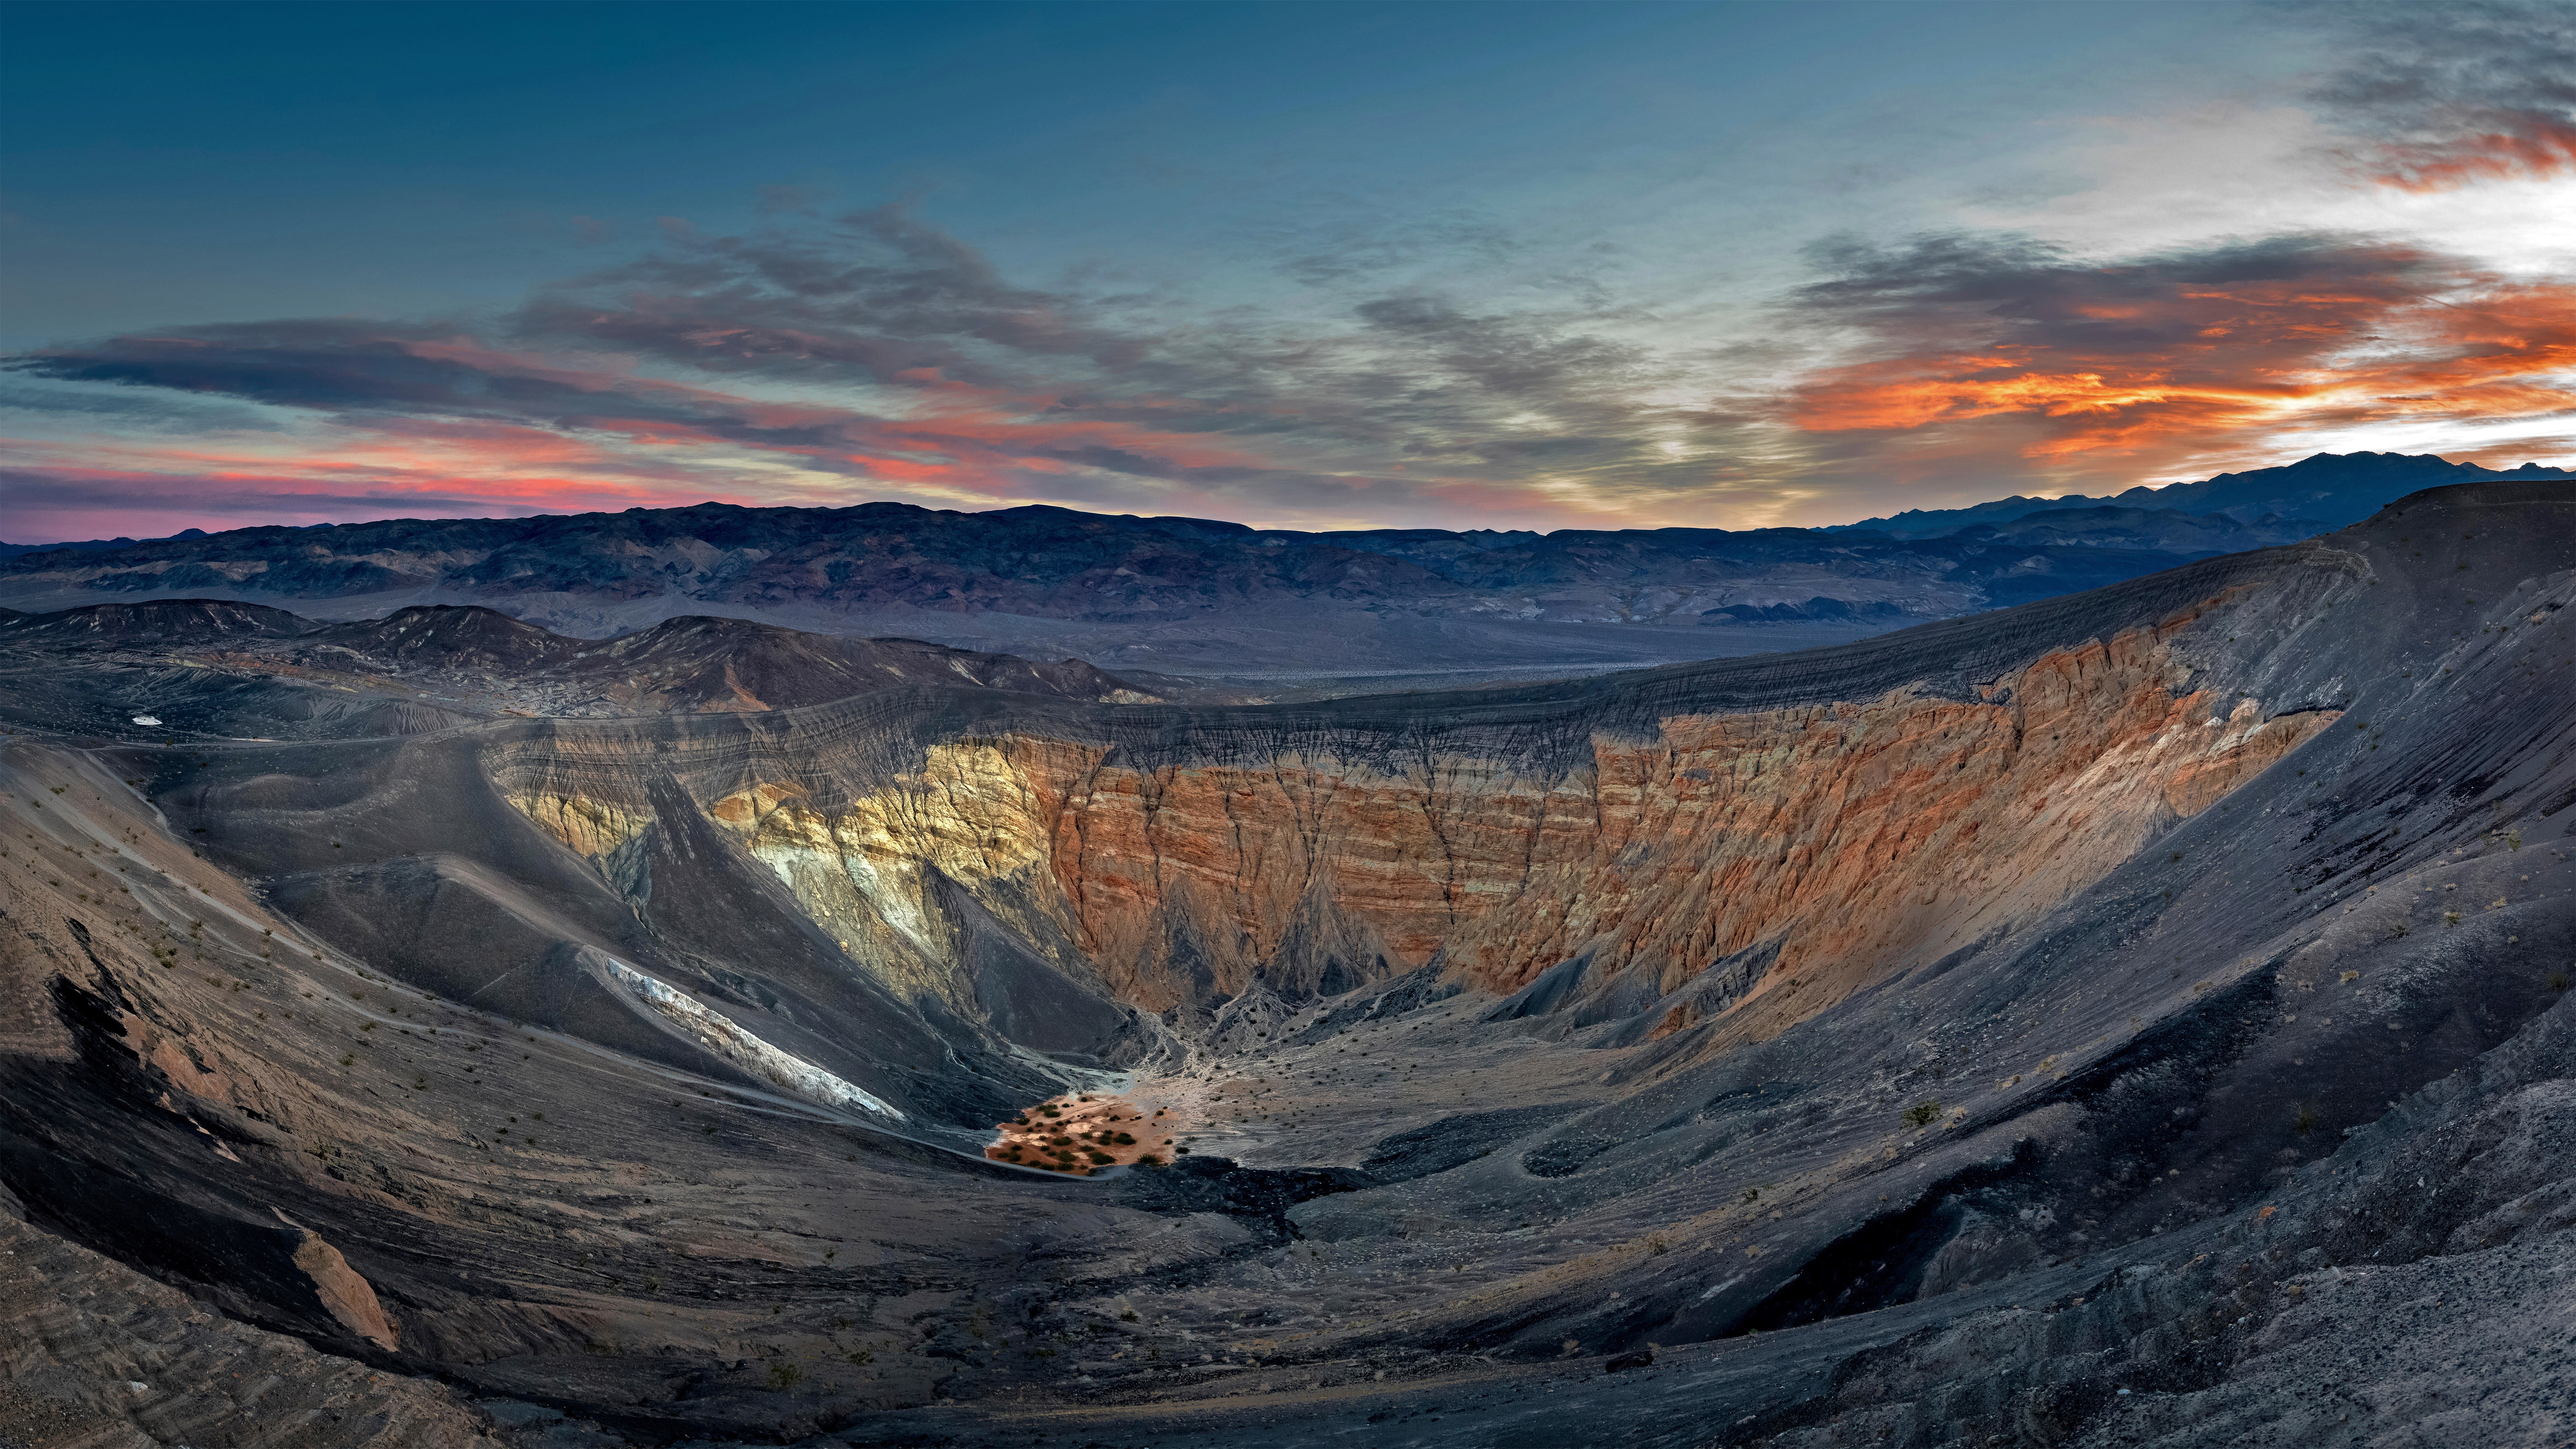 Ubehebe Crater in Death Valley National Park, California, USA by Albert Knapp